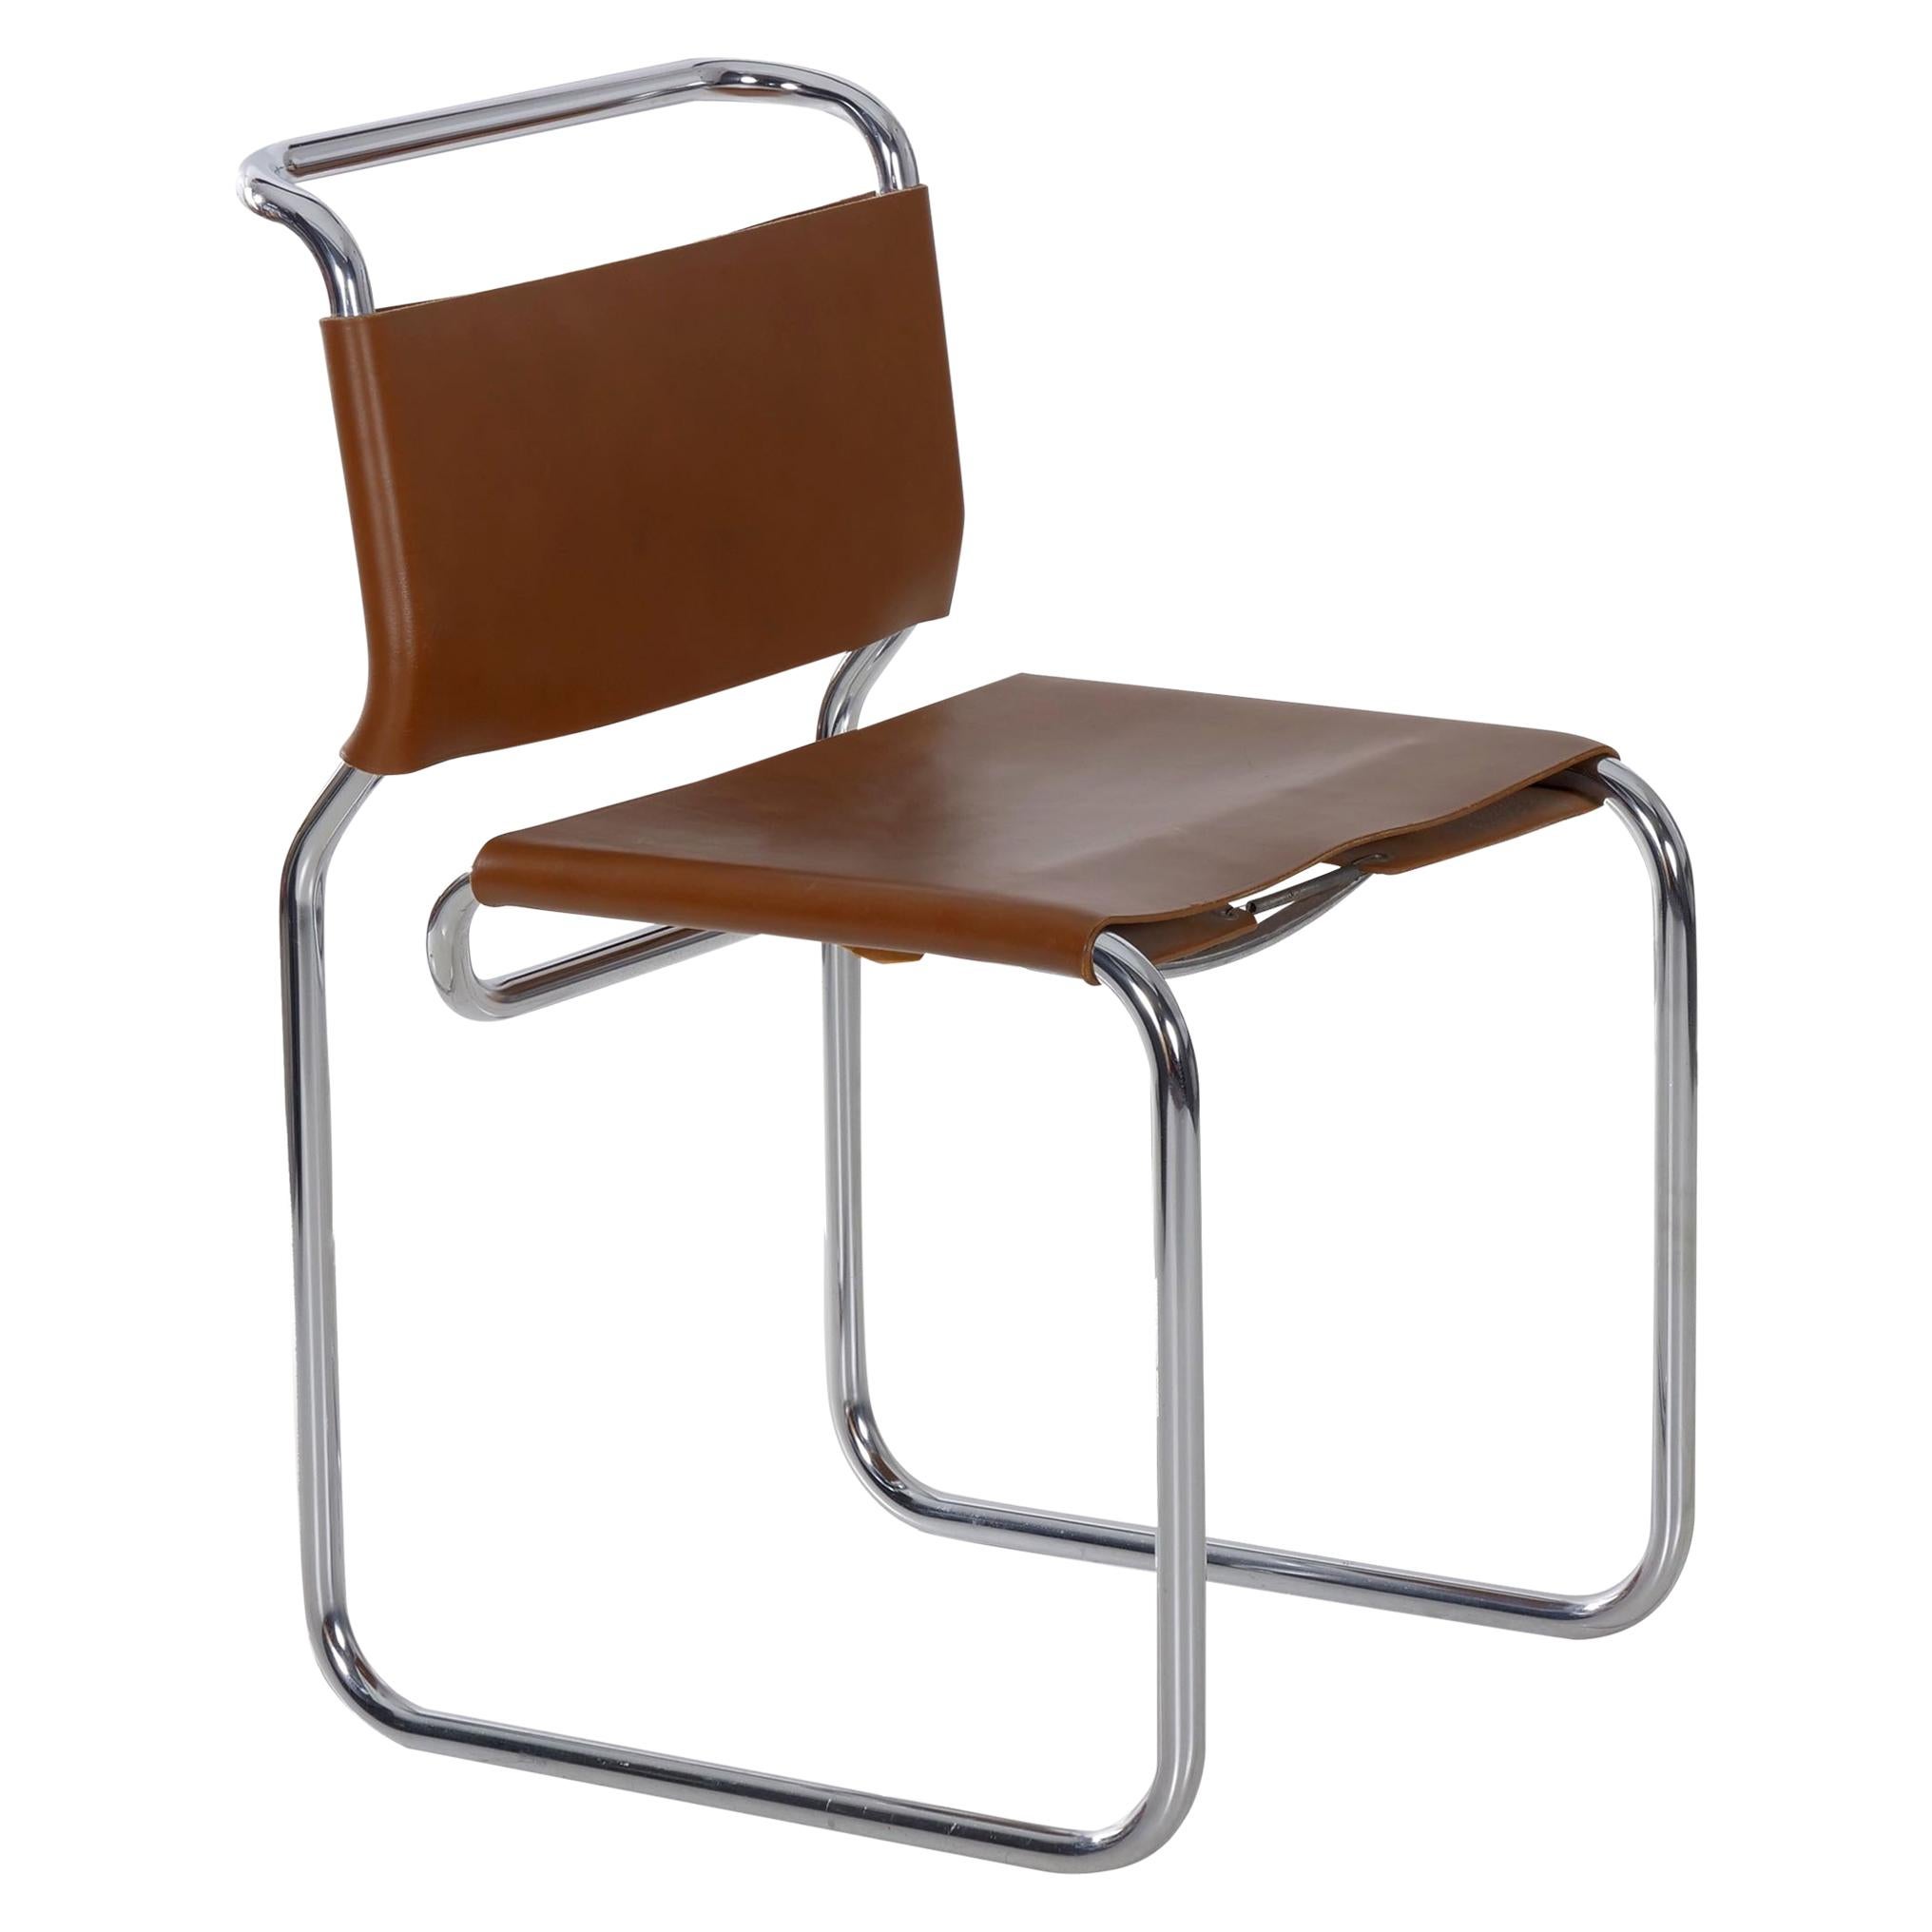 Cantilever “CH66” Chrome and Leather Tubular Side Chair by Nicos Zographos